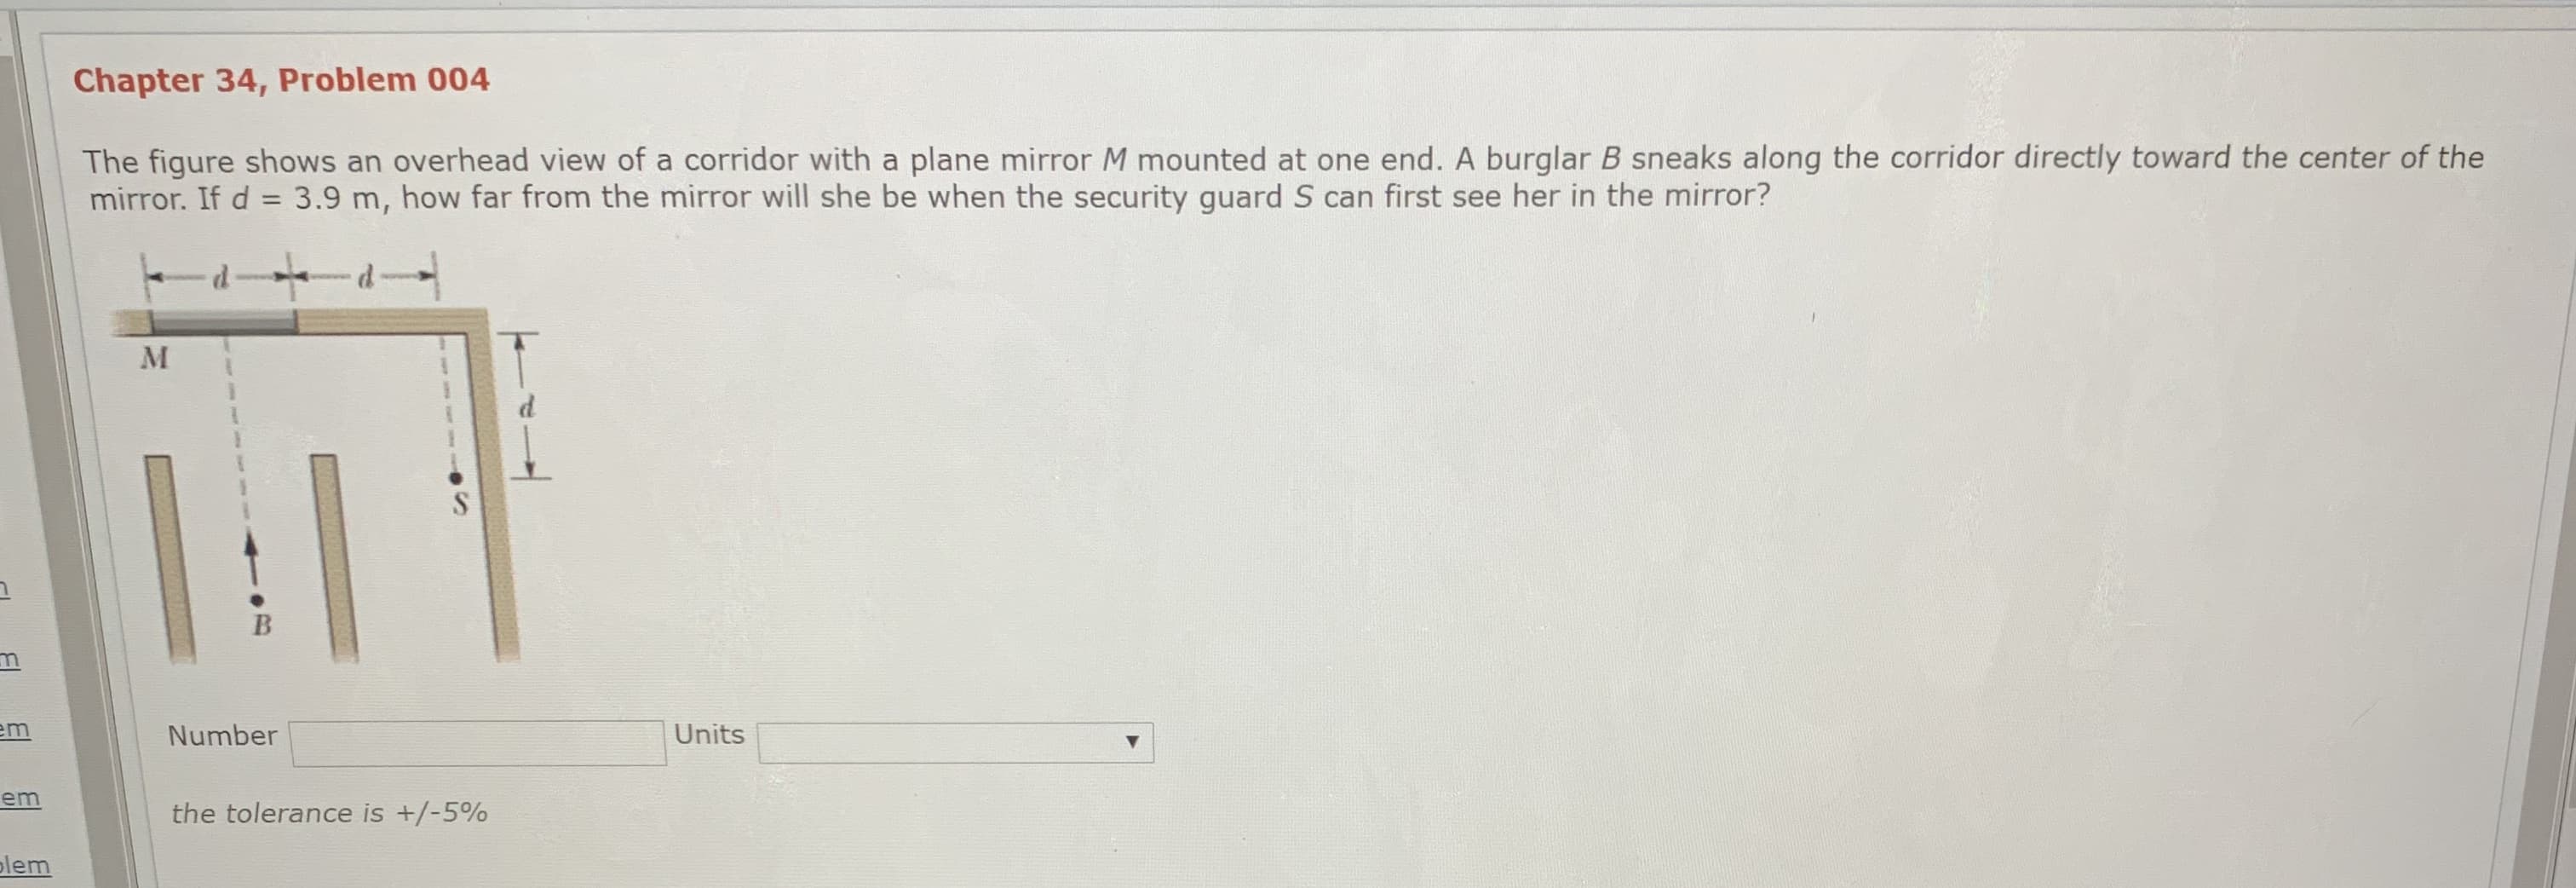 Chapter 34, Problem 004
The figure shows an overhead view of a corridor with a plane mirror M mounted at one end. A burglar B sneaks along the corridor directly toward the center of the
mirror. If d = 3.9 m, how far from the mirror will she be when the security guard S can first see her in the mirror?
em
Number
Units
the tolerance is +/-5%
lem
